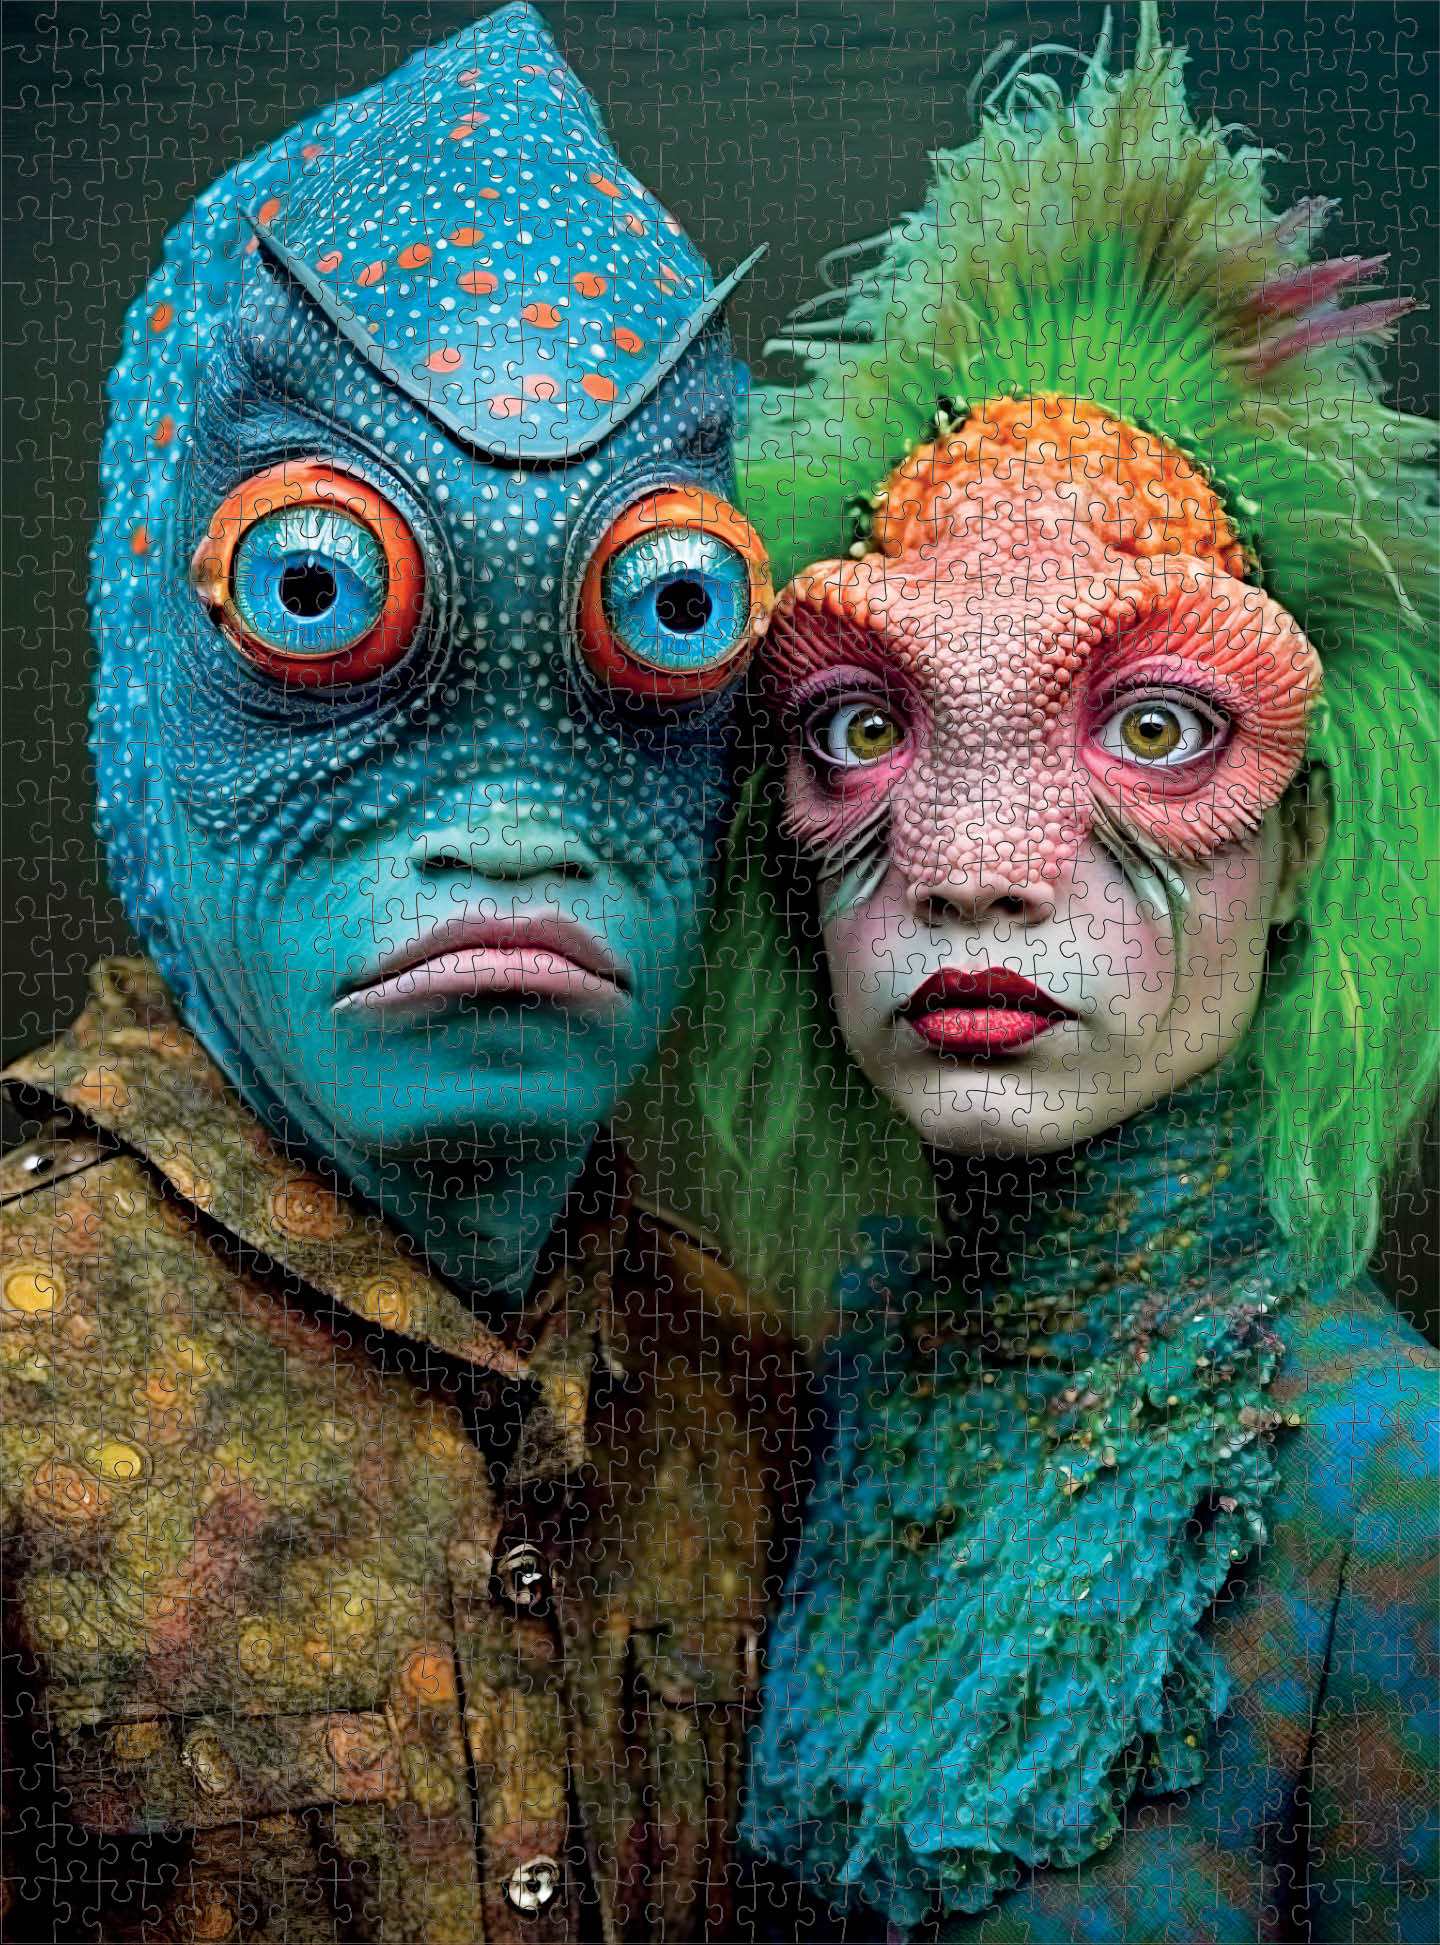 Meet the Aliens: Tralyn and Jorin - 1000 Piece Jigsaw Puzzle